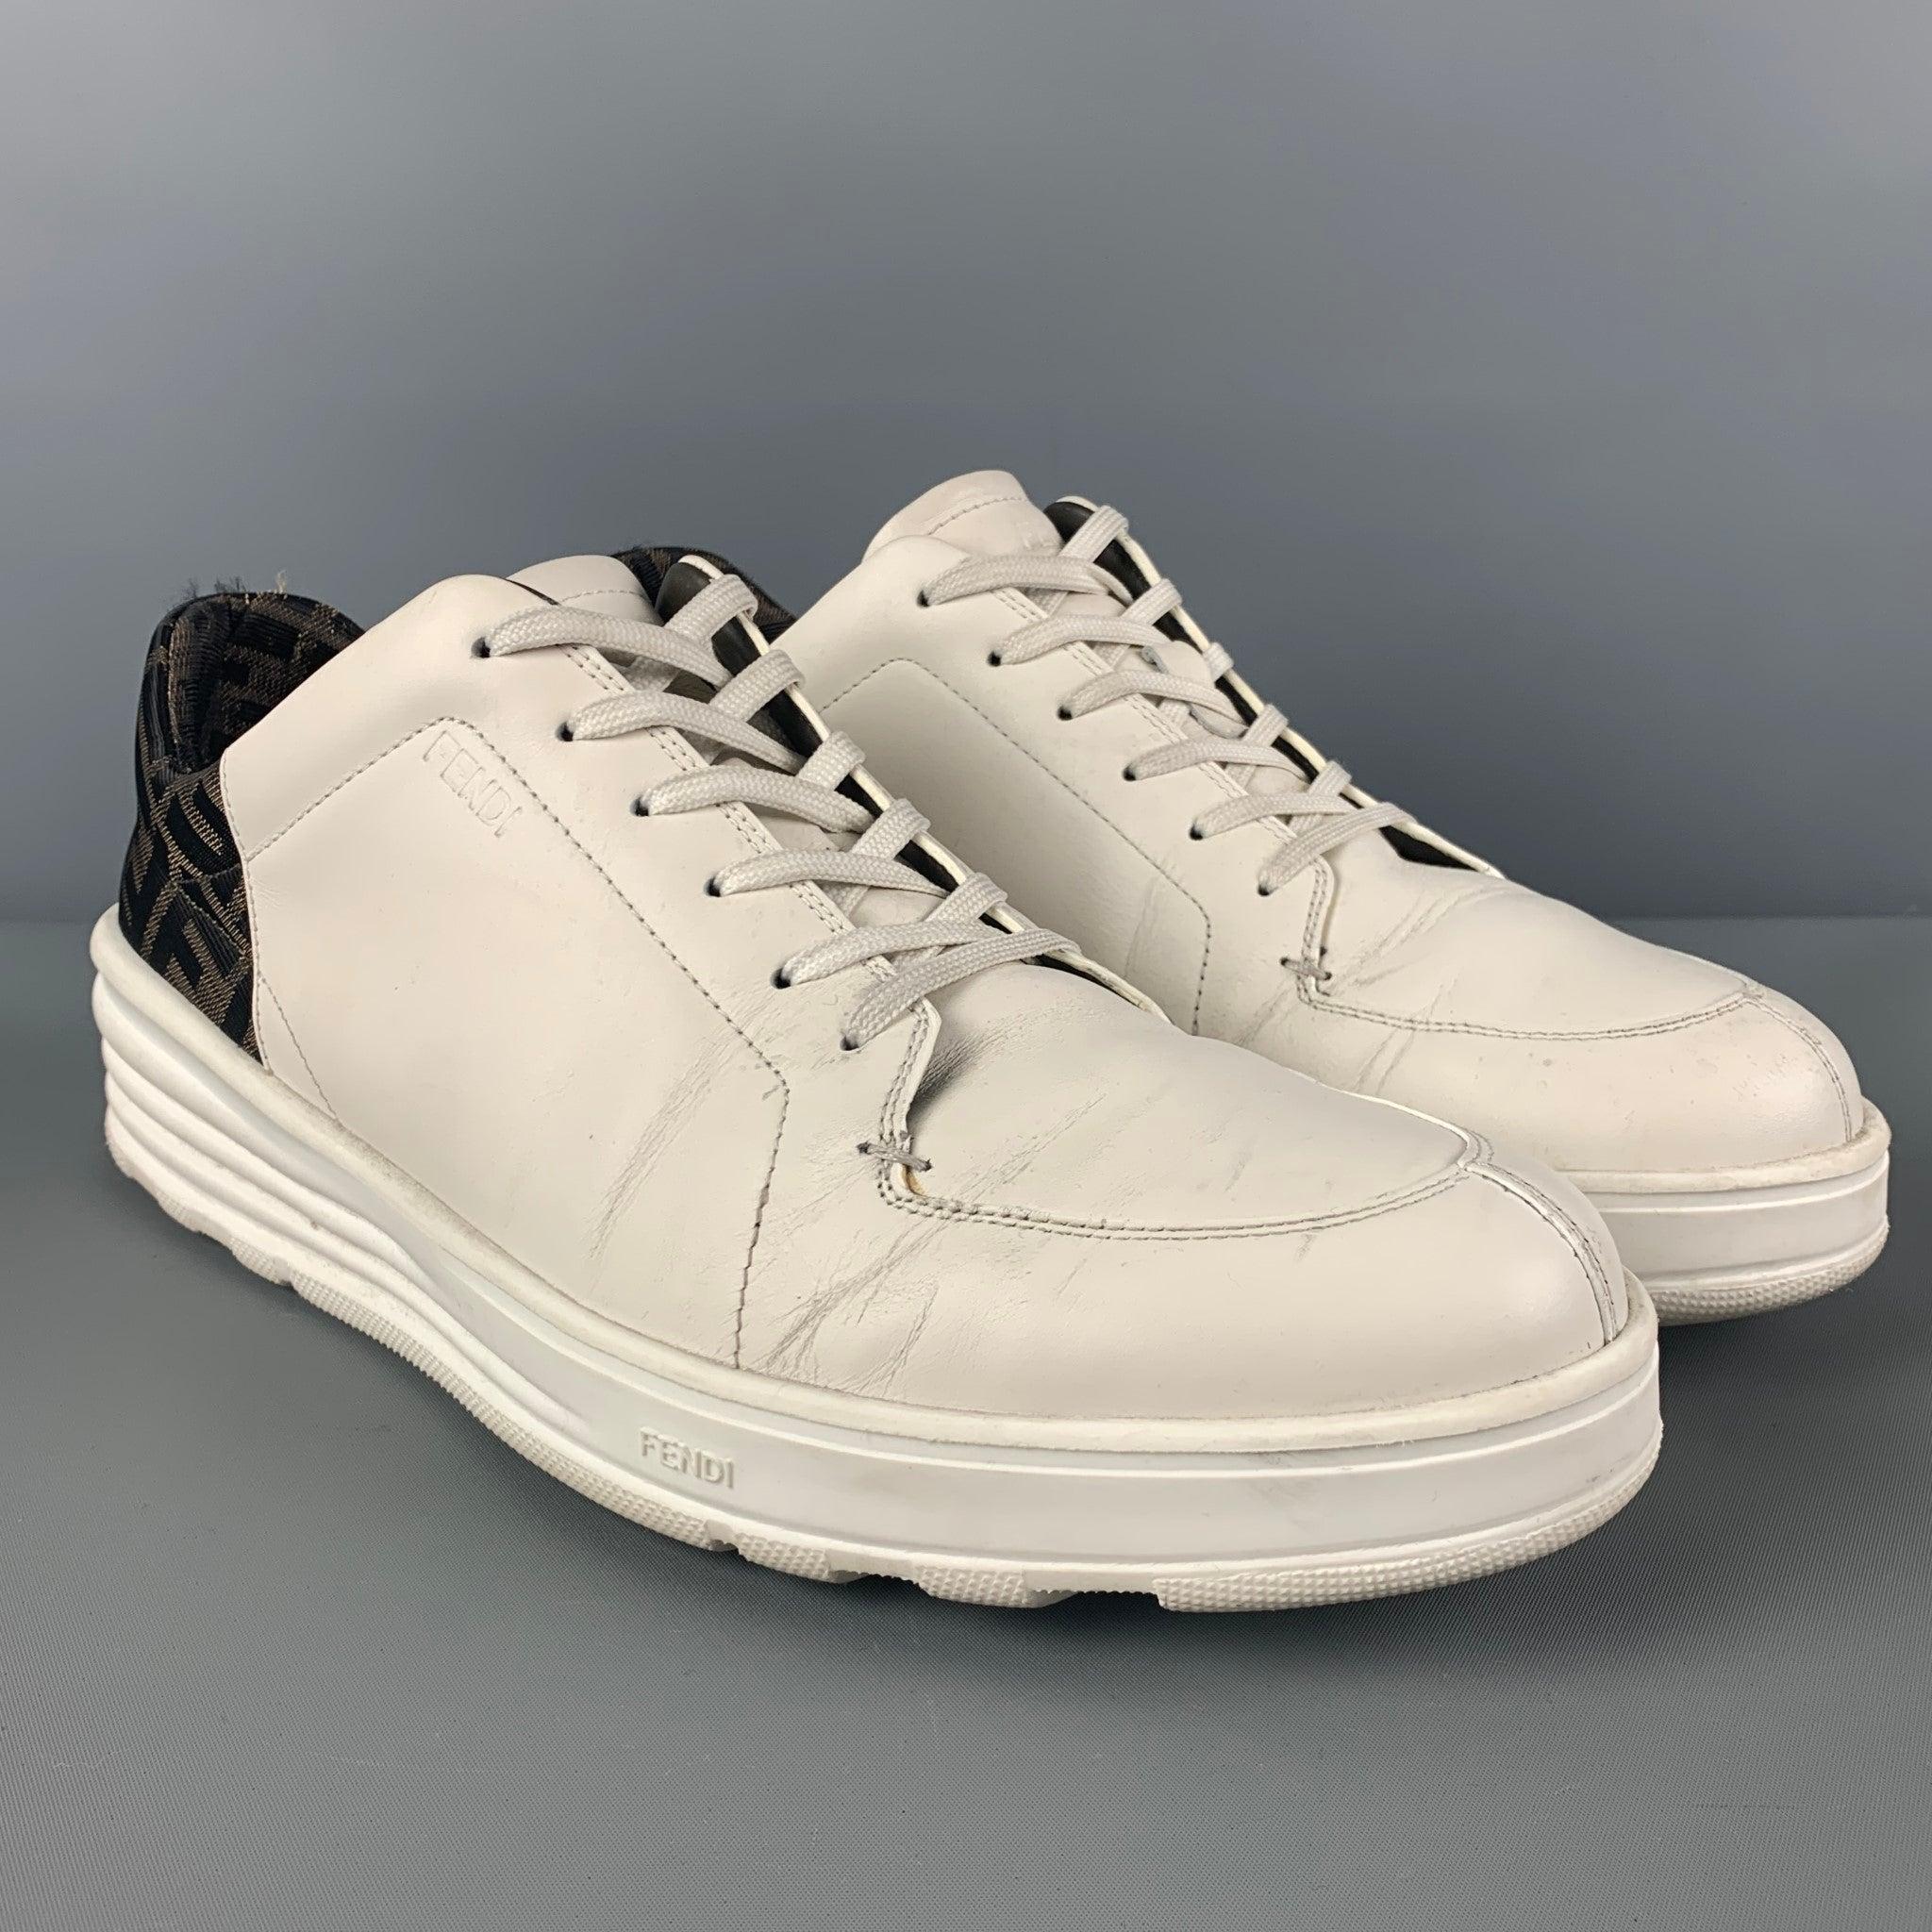 FENDI sneakers comes in a white leather with a brown logo trim featuring a split toe and a lace up closure. Made in Italy. Includes dust bag.
Good
Pre-Owned Condition. Moderate wear throughout.  

Marked:  
Size not visible. Outsole: 13 inches  x